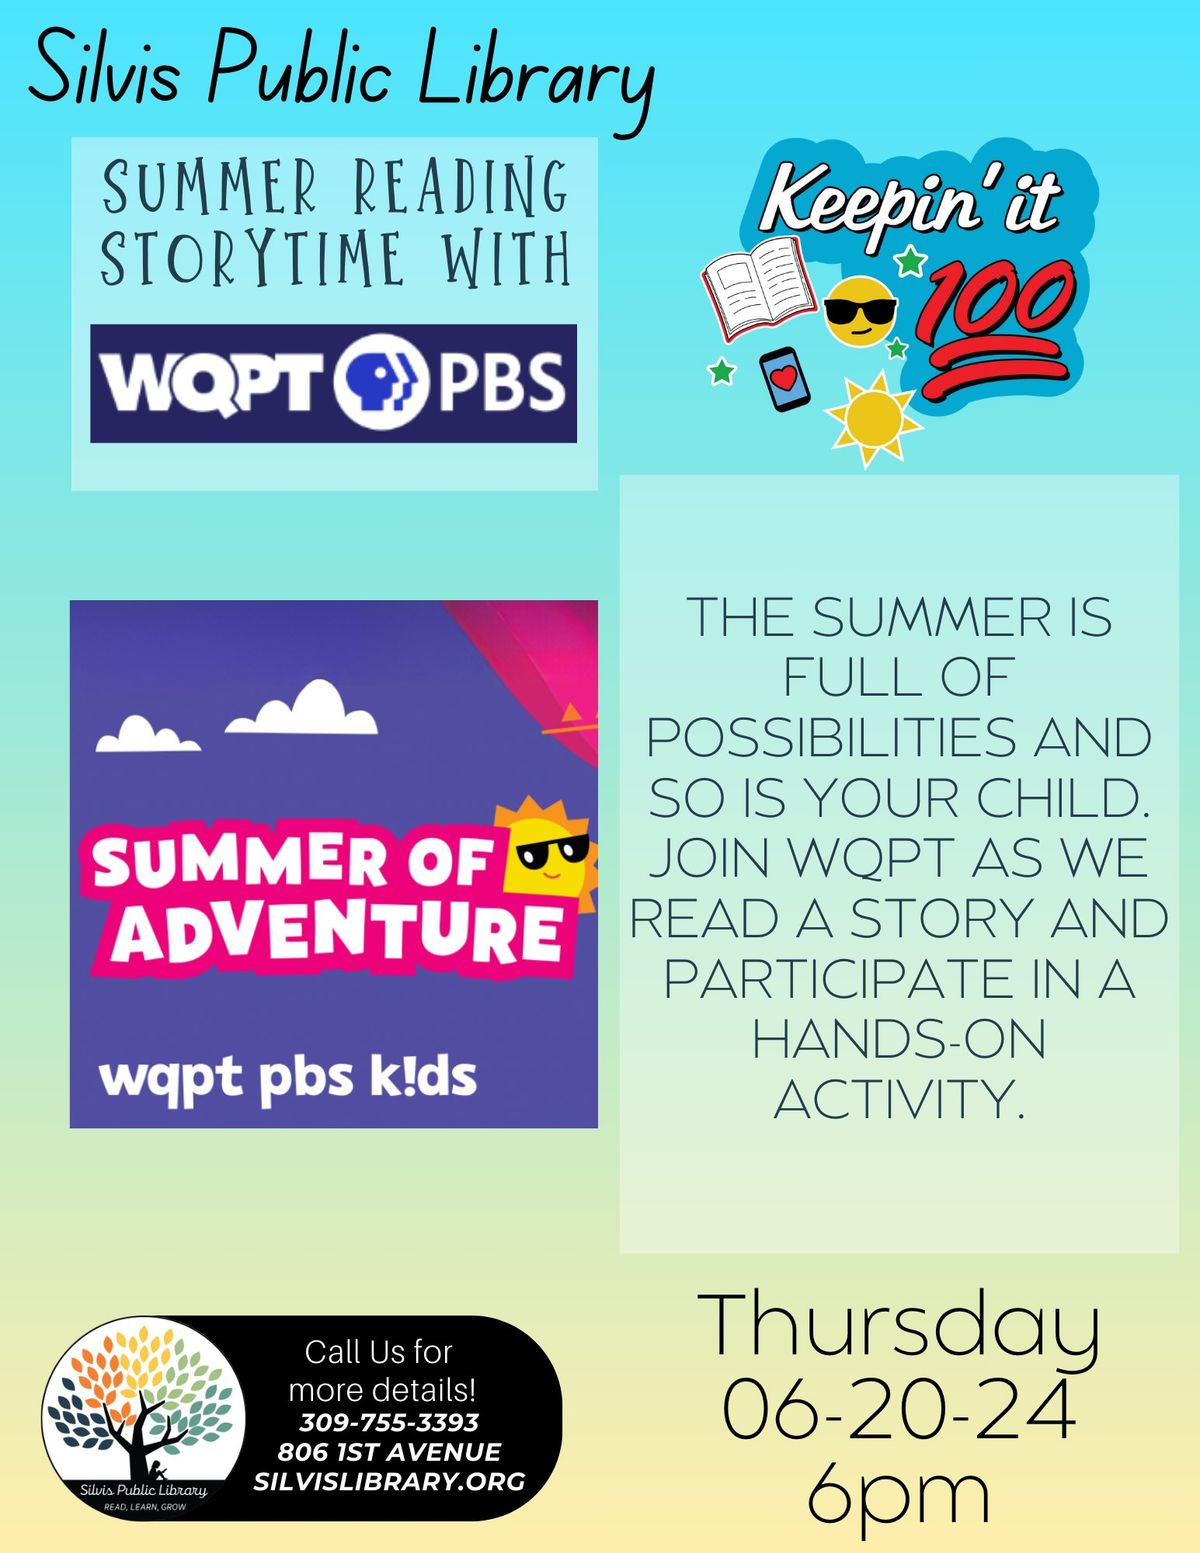 SRP Storytime with WQPT PBS